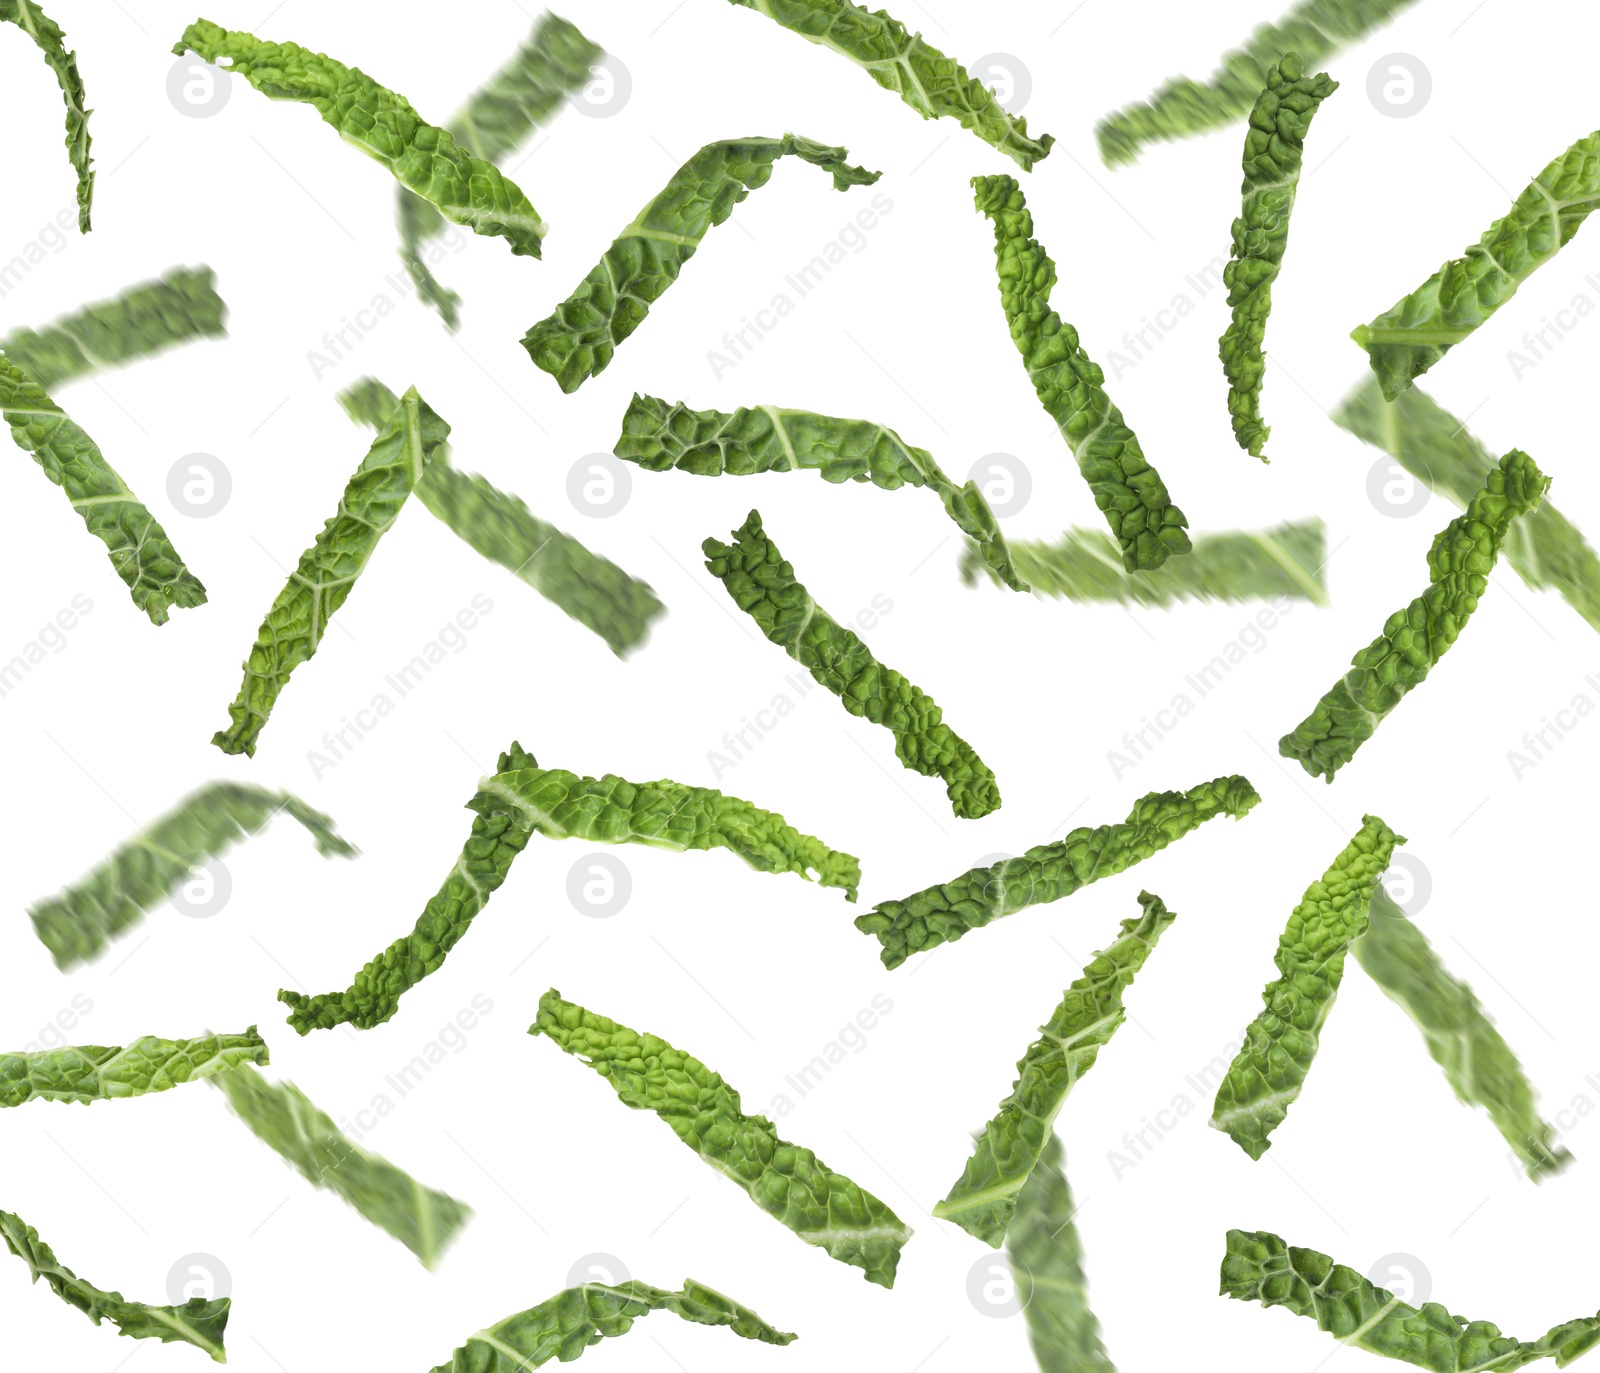 Image of Set with falling fresh pieces of savoy cabbages on white background